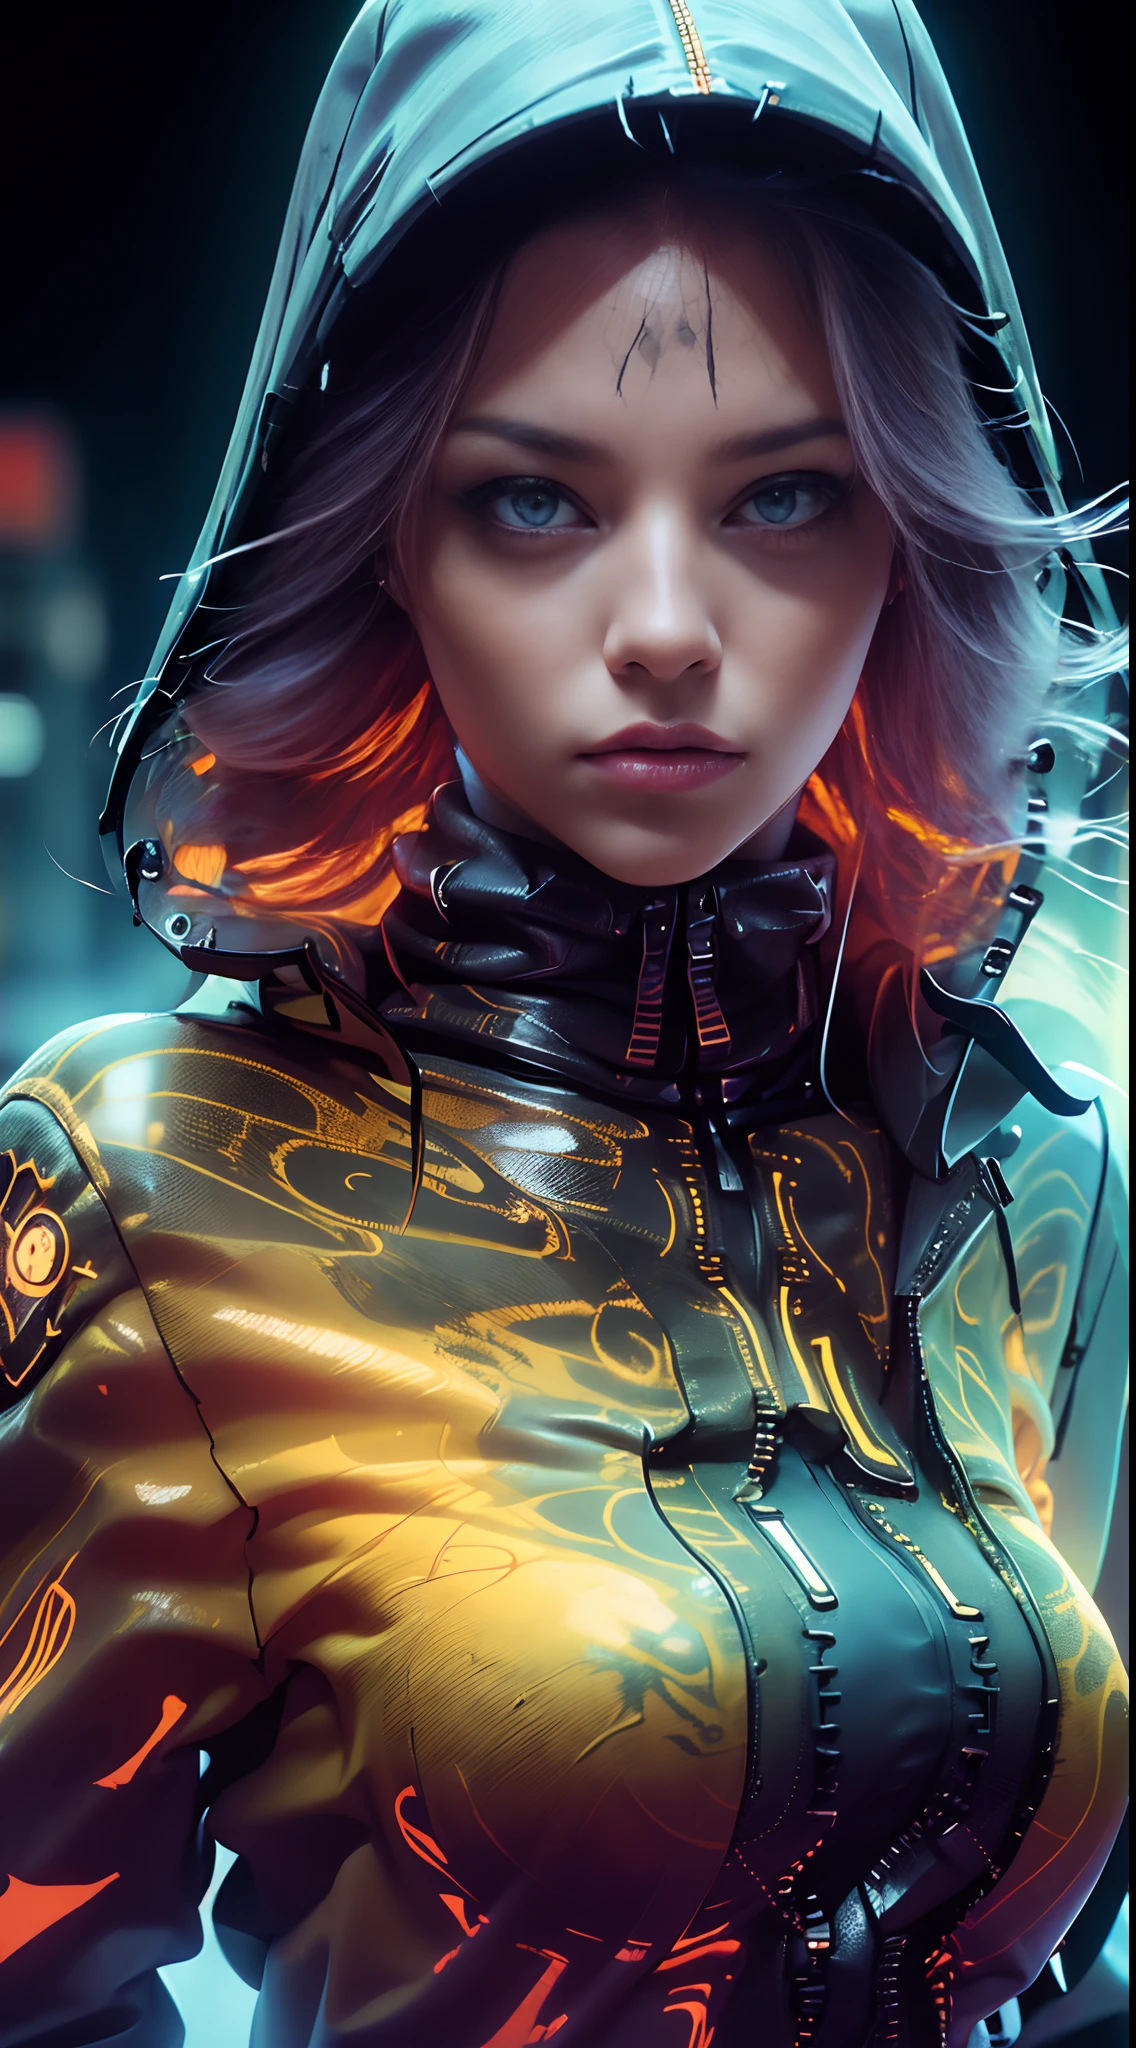 unreal engine:1.4,UHD,The best quality:1.4, photorealistic:1.4, skin texture:1.4, Masterpiece:1.8, 18 year old female, Red mesh hair on black hair, long hair, straight hair,  , Comic appearance，(Apocalyptic City of Fire),(Cyberpunk:1.4),(The best quality,4k,High resolution), 18 year old female, Red highlights in black hair, long hair, straight hair, Transforming woman,one，cold eyes ,sharp eye，distressed look，bright red eyes，Improved facial expression，，Change the appearance of a transformation，beast，Bestialification，evil fight，Buttle，Delicate illustrations drawn in detail，Torn clothes with decoration，disheveled clothes，Realistic depiction，vibrant colors，expressive，Classic background